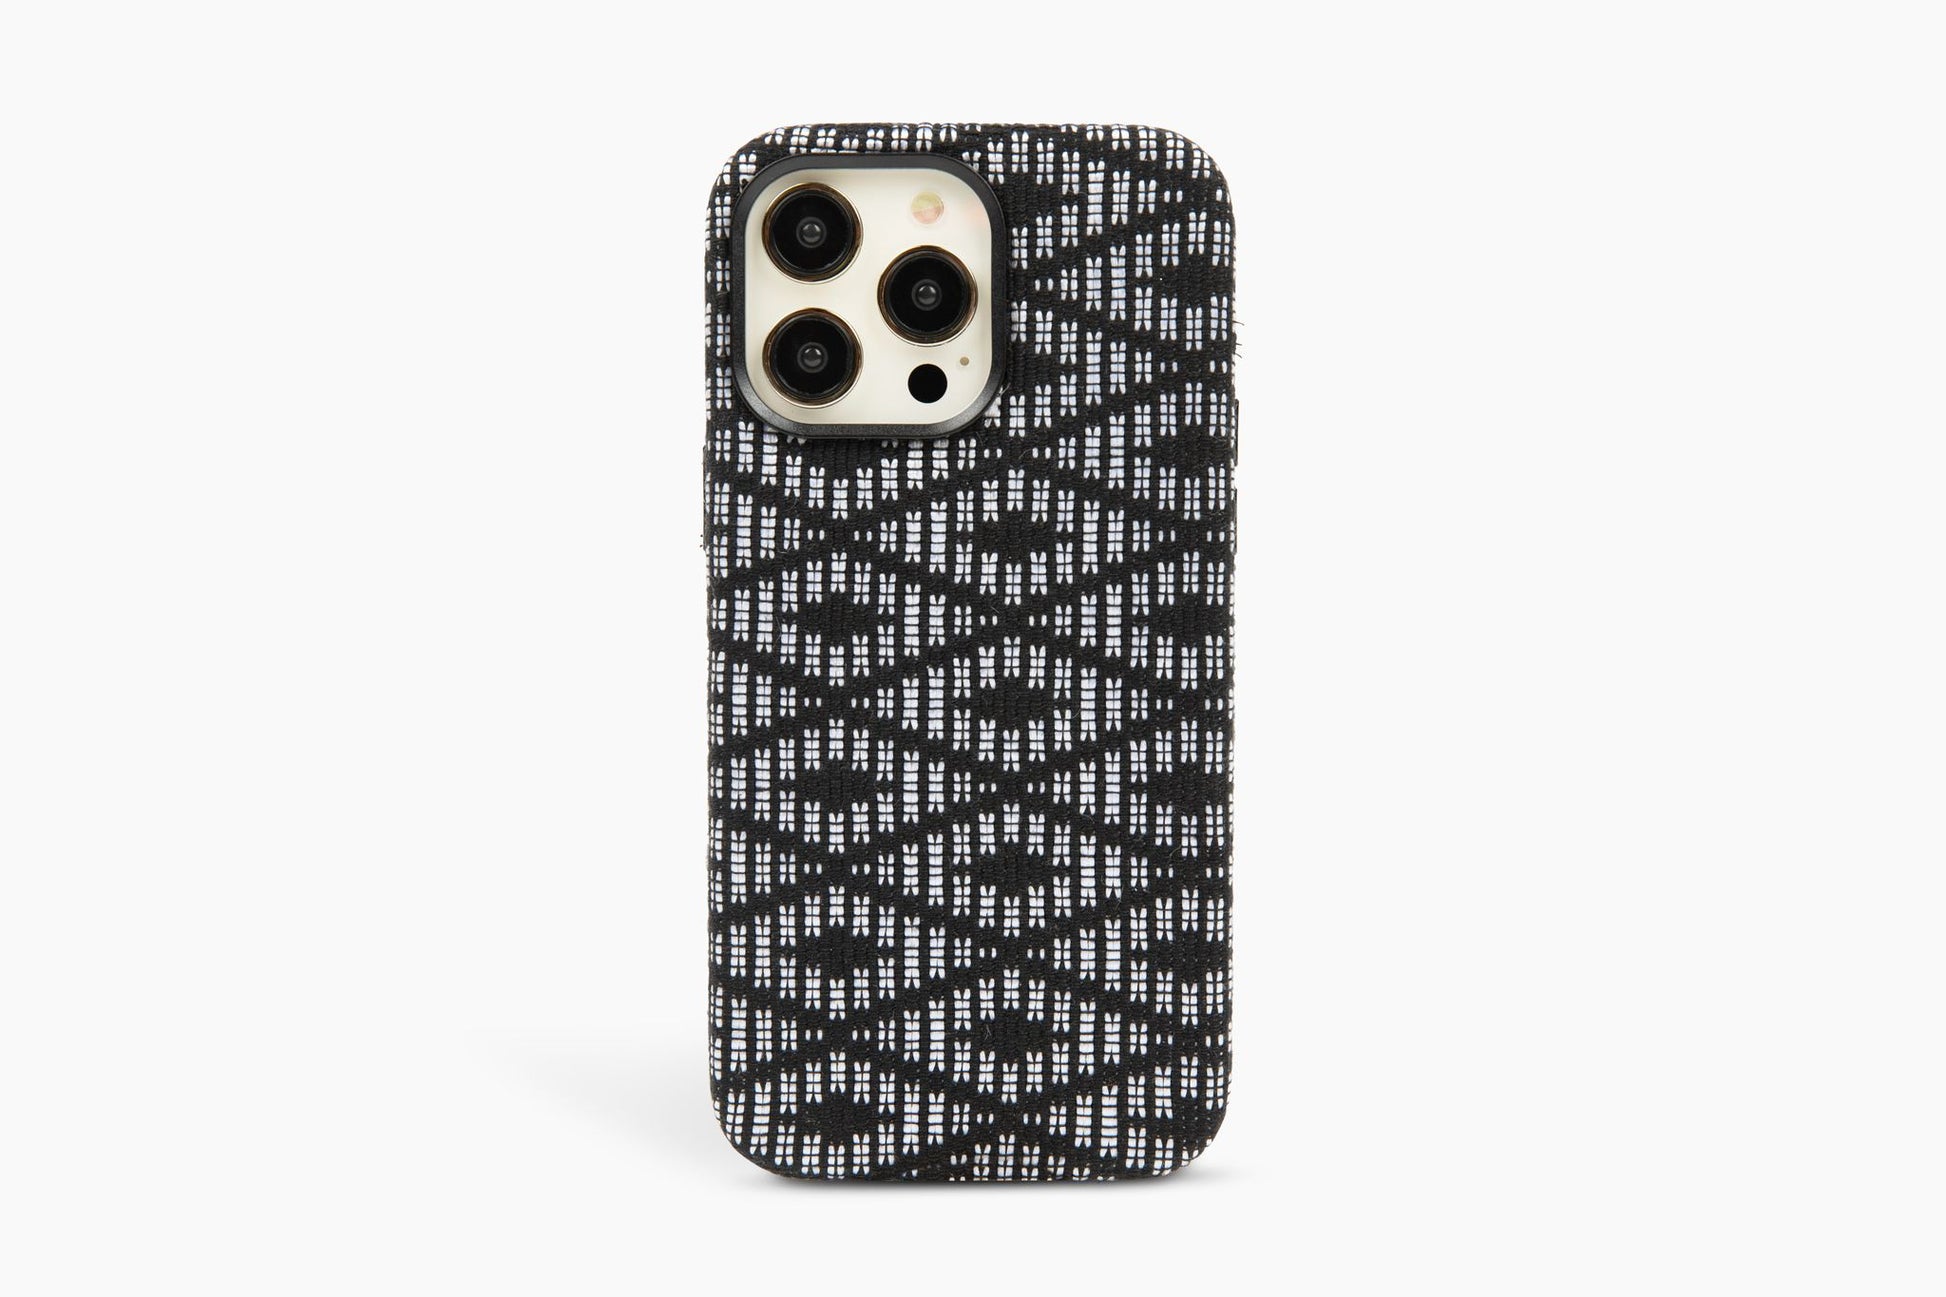 Classic phone case featuring black and white zigzag patterns on a white background, designed for iPhone 12, 13, and 14 Pro Max, perfect for adding a touch of timeless elegance.